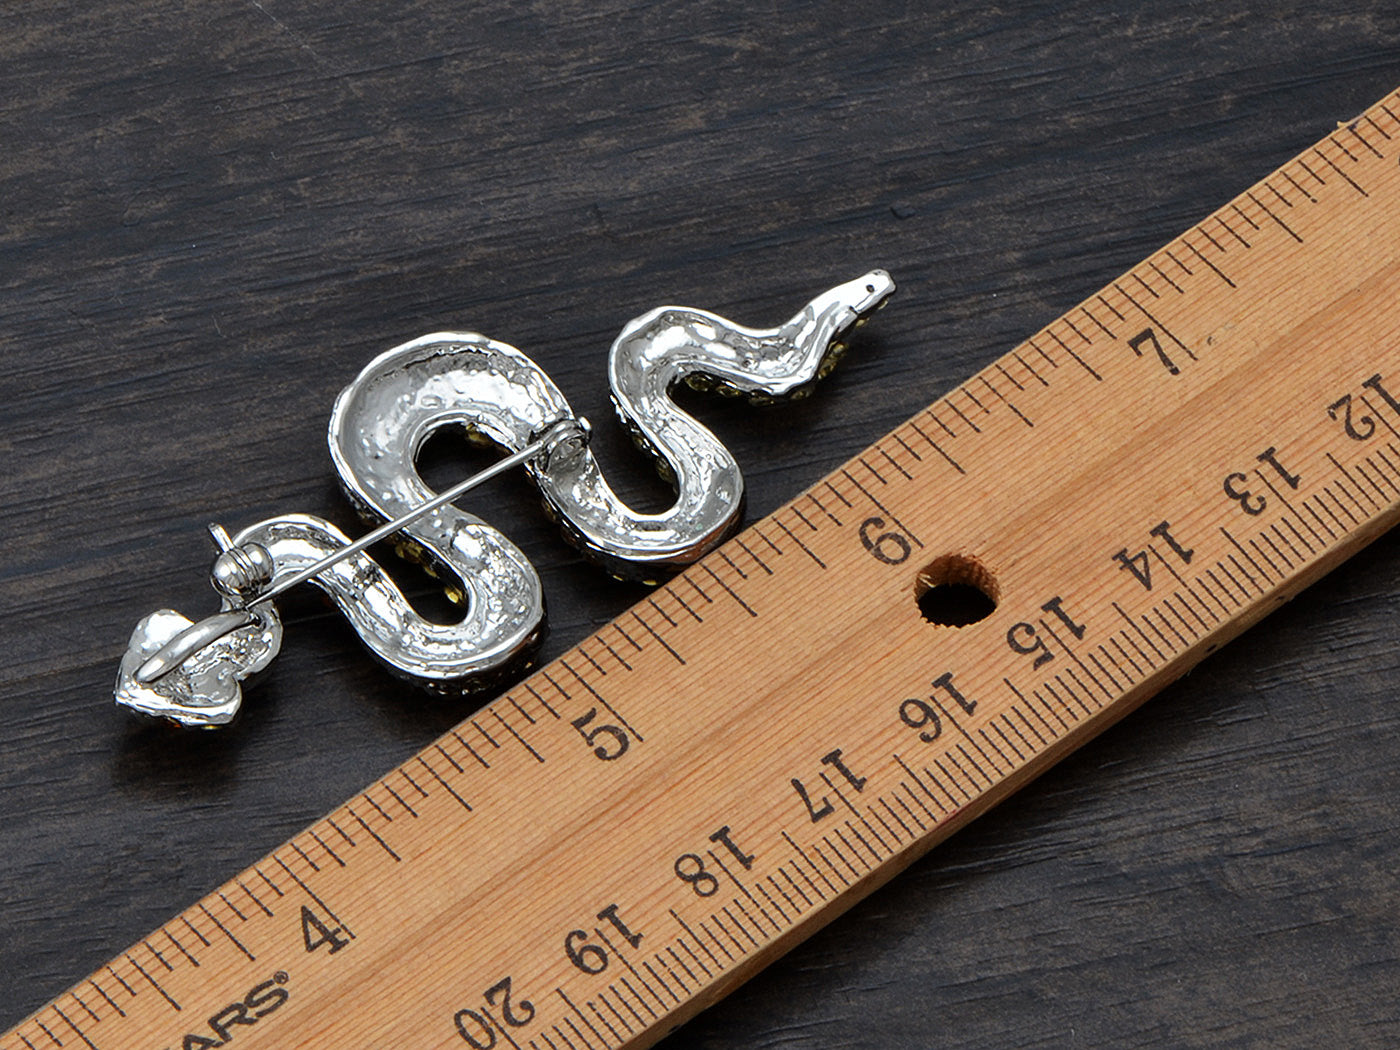 Silver Ombre Topaz Colored Slithering Jungle Snake Animal Brooch Pin